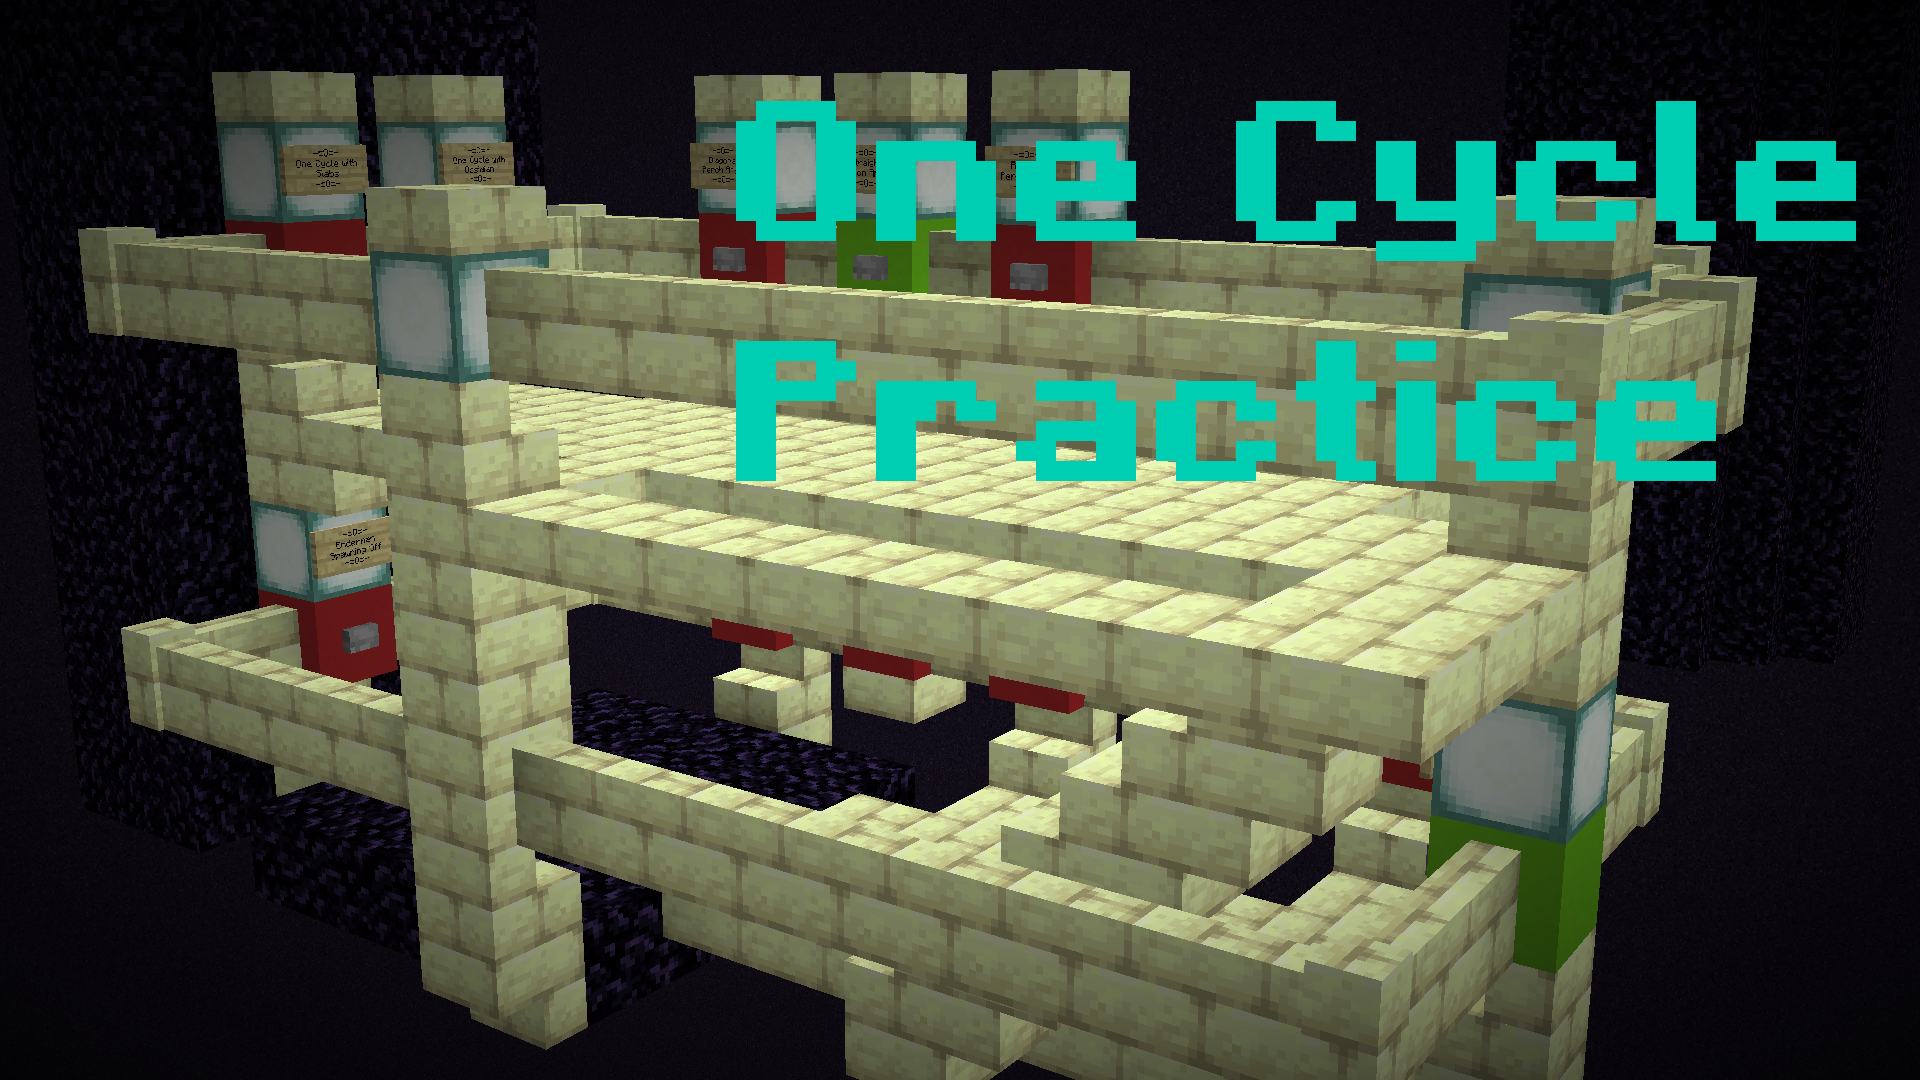 Tải về One Cycle Practice cho Minecraft 1.16.1